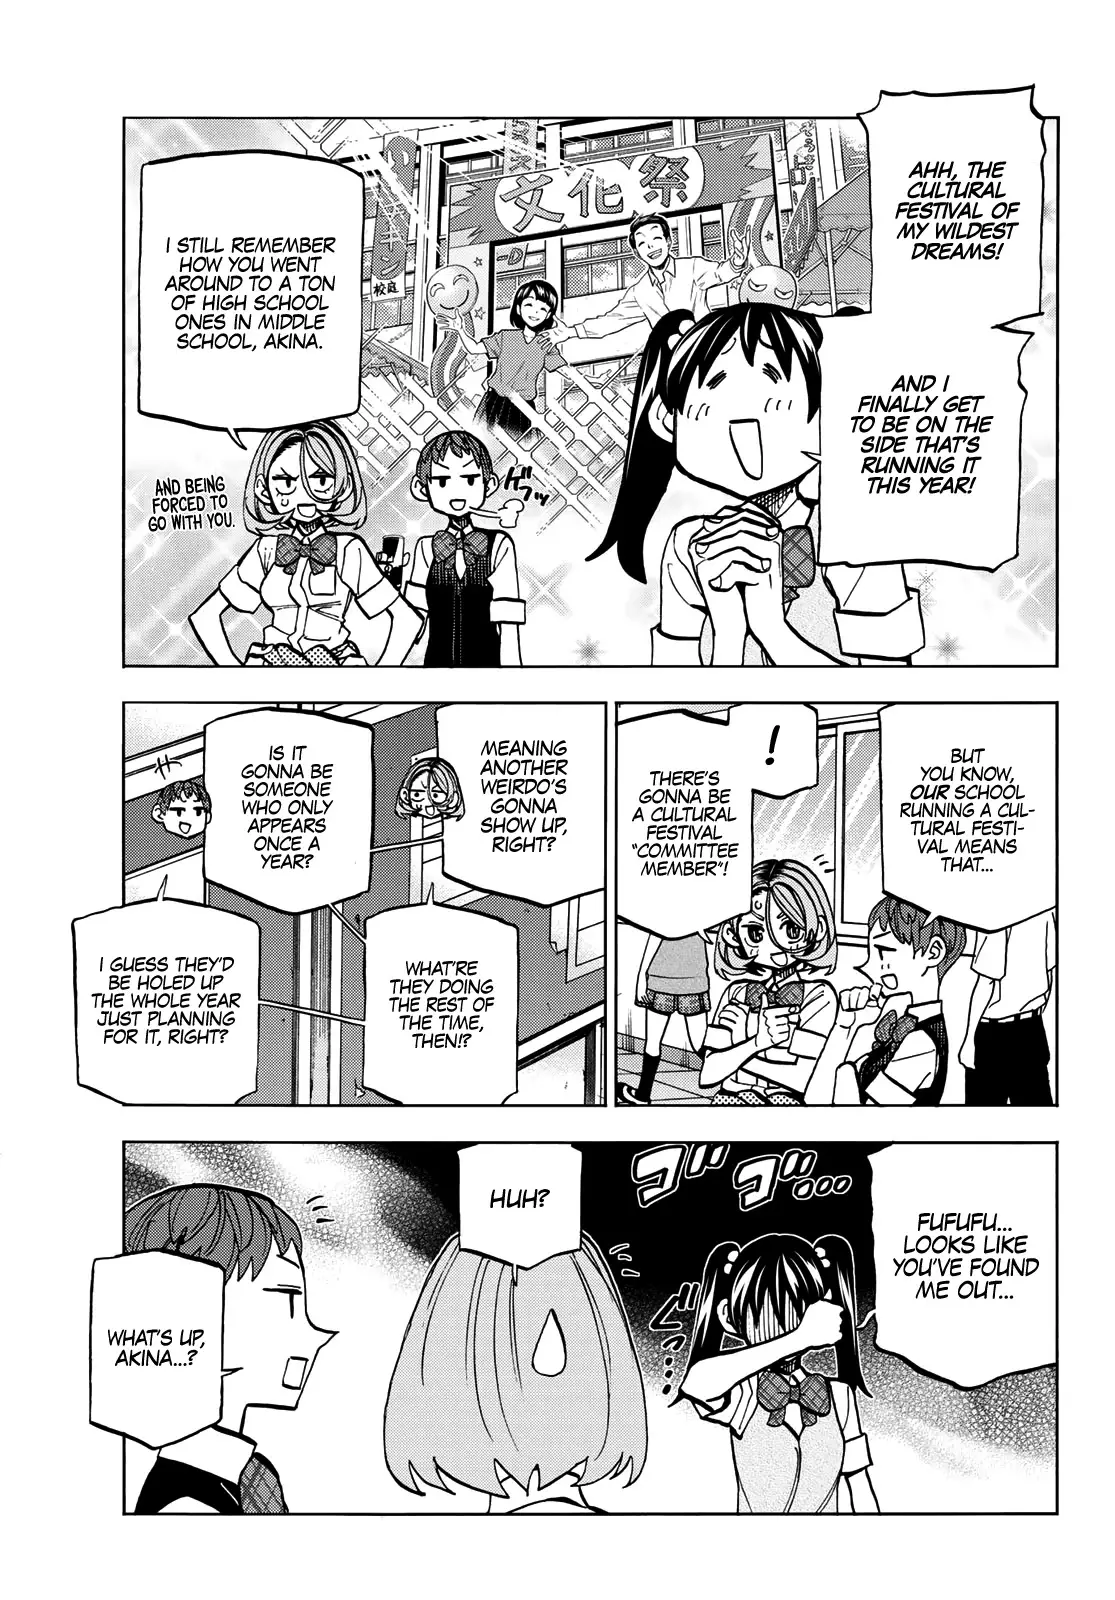 The Story Between A Dumb Prefect And A High School Girl With An Inappropriate Skirt Length - 27 page 4